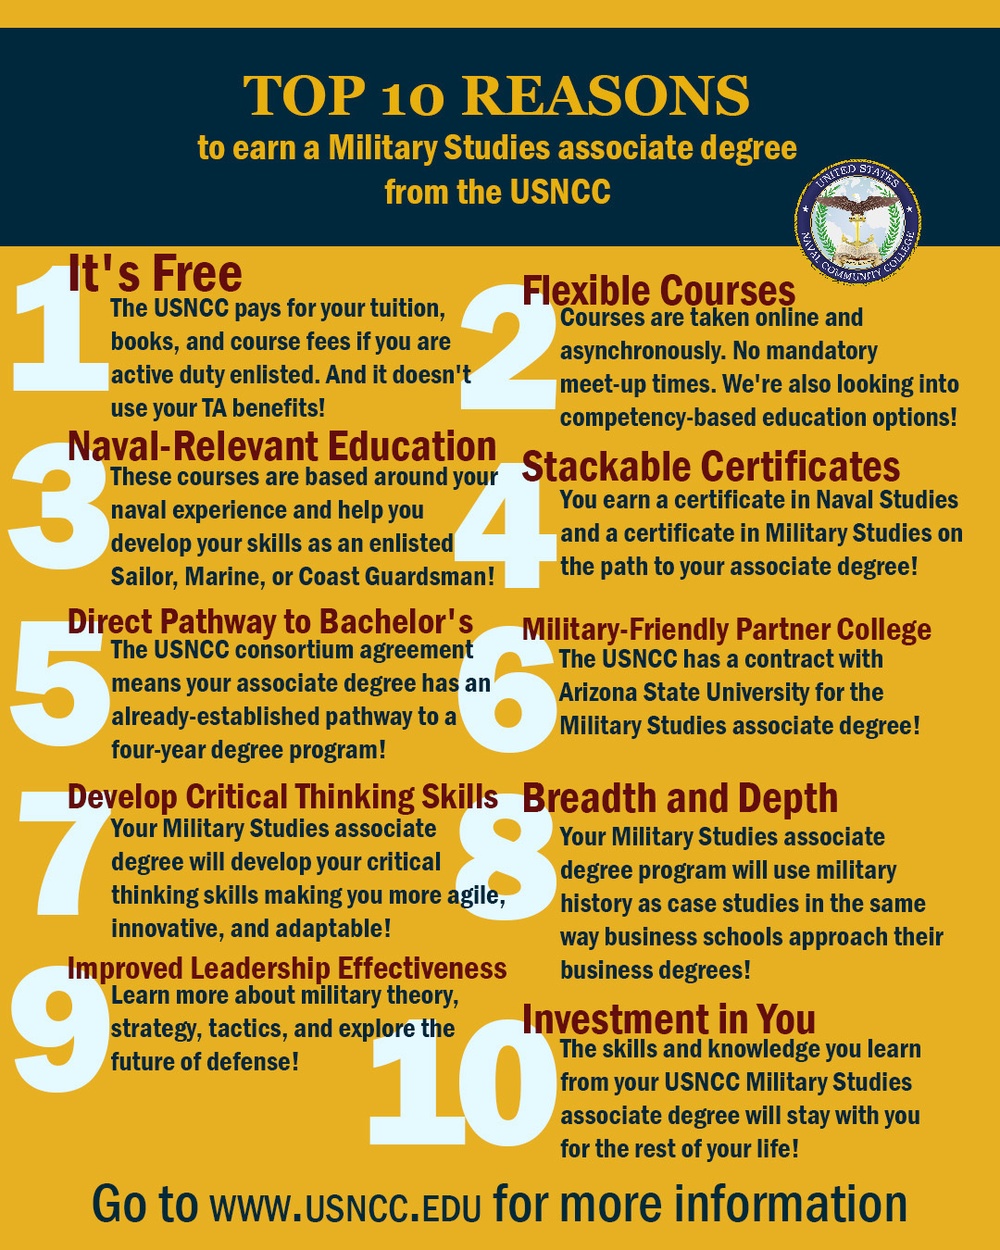 Top 10 Reasons to Apply to the Military Studies Program at USNCC